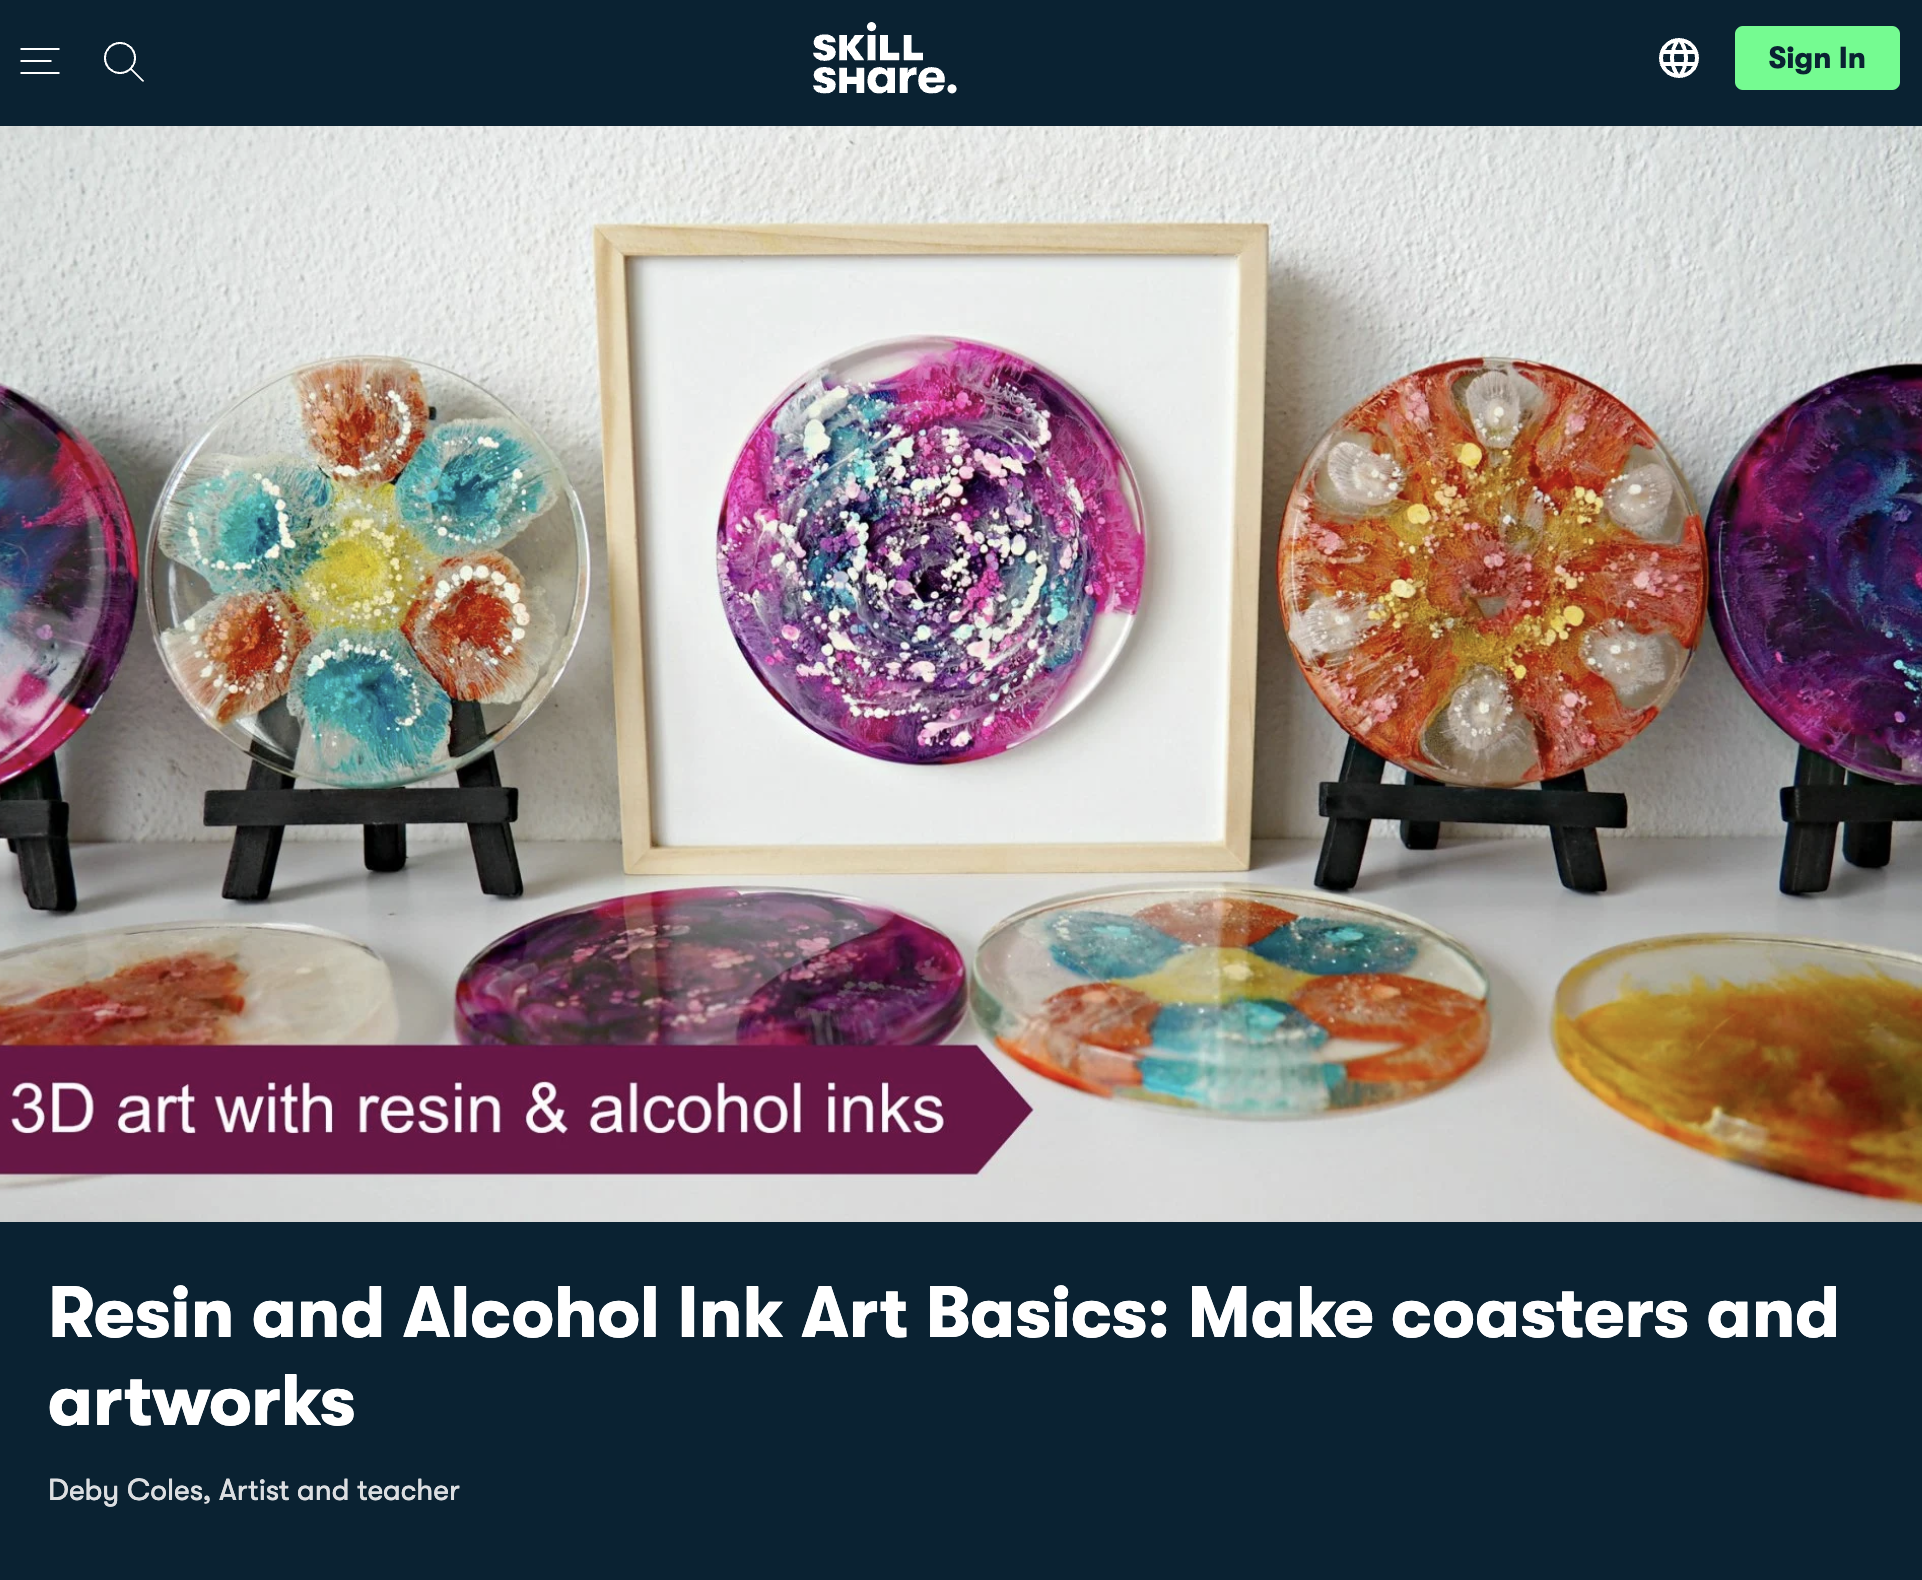 Resin and Alcohol Ink Art Basics